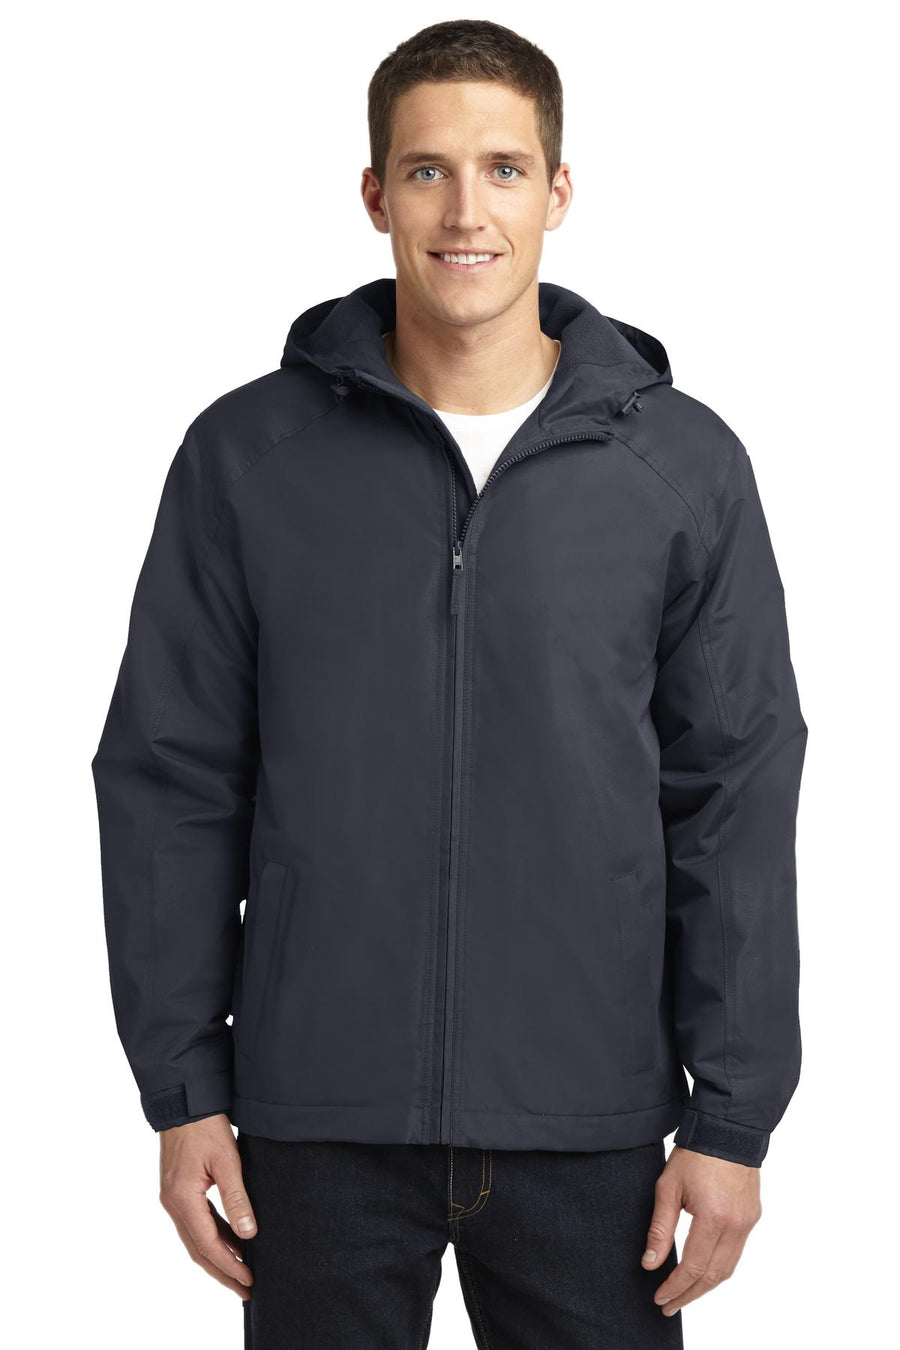 Port Authority Hooded Charger Jacket.